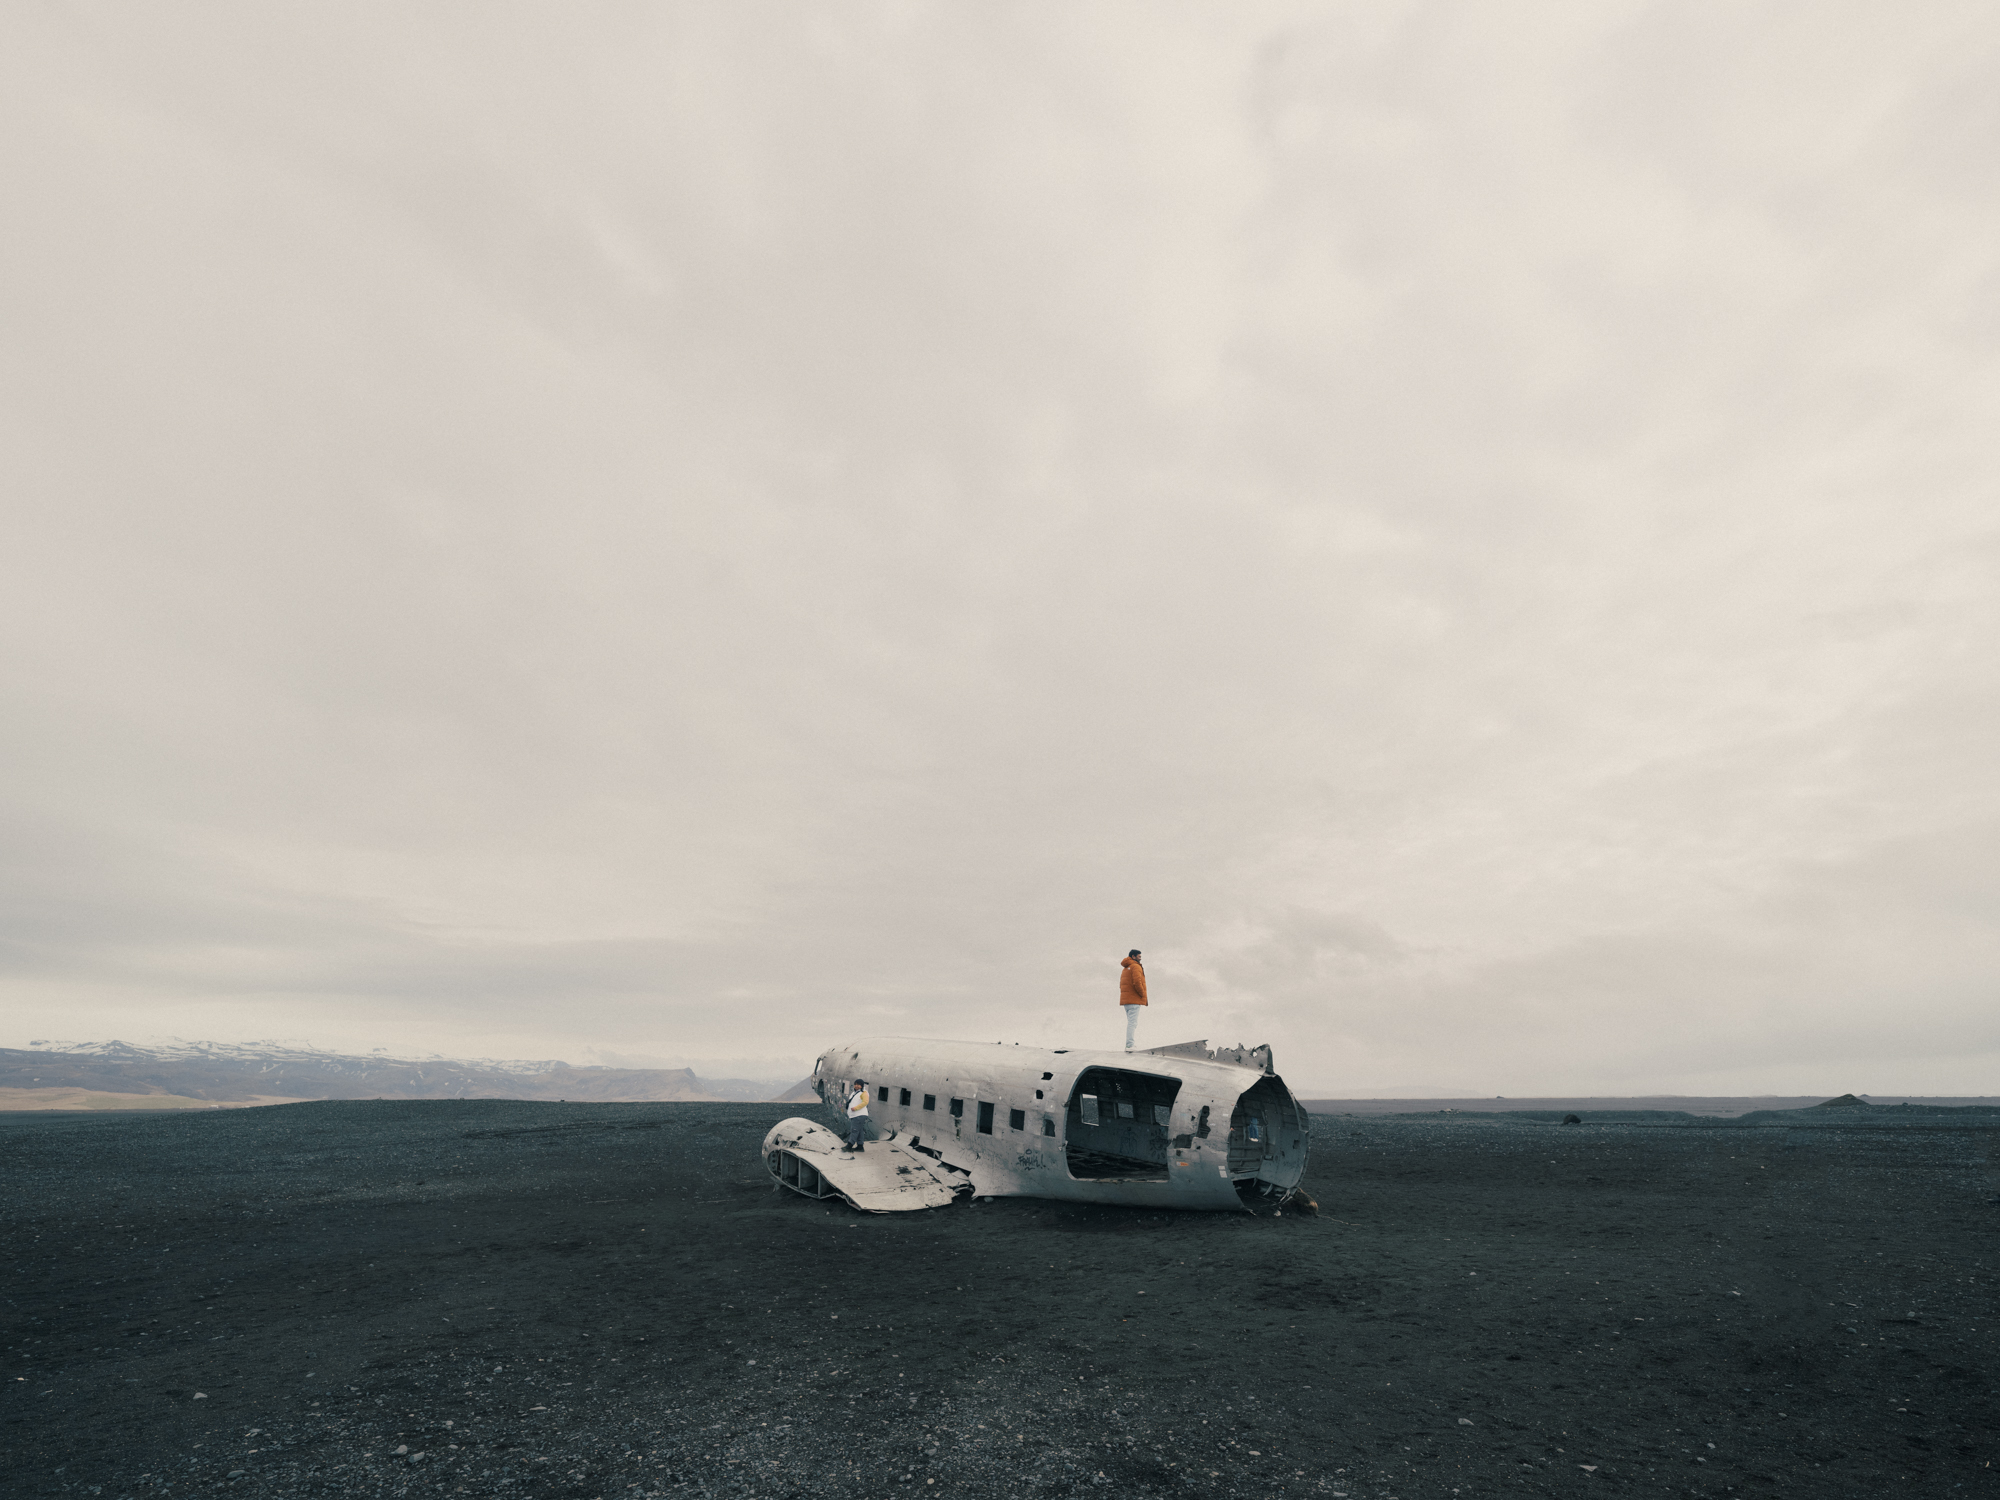  DC-3 plane wreckage in Iceland: A haunting reminder of aviation history amidst Iceland's rugged landscape.